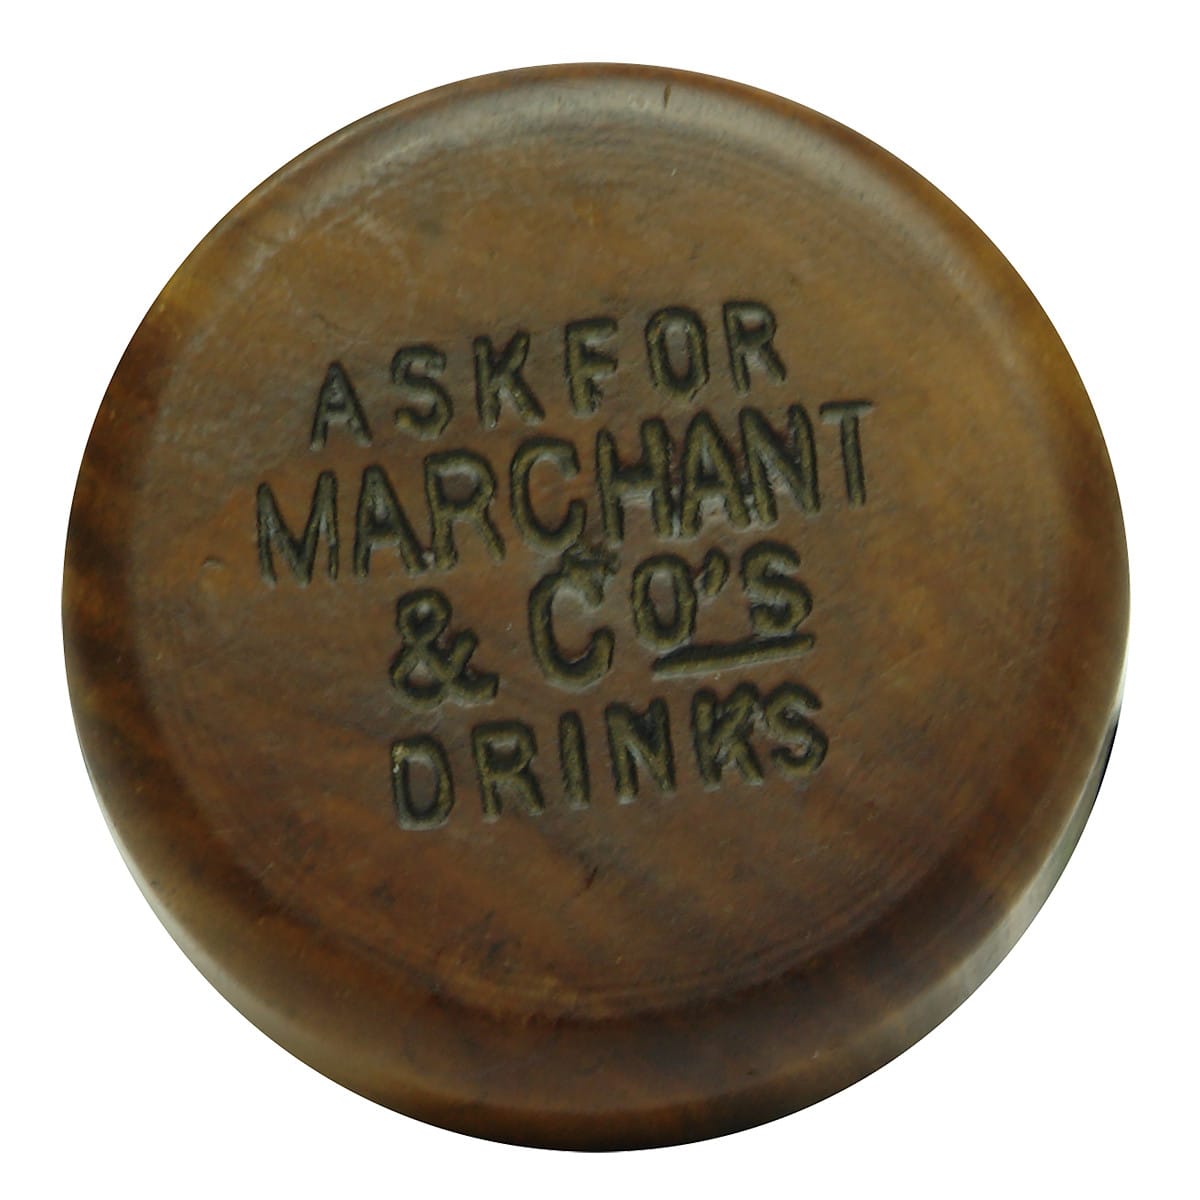 Internal Thread Opener. Ask For Marchant & Co's Drinks.